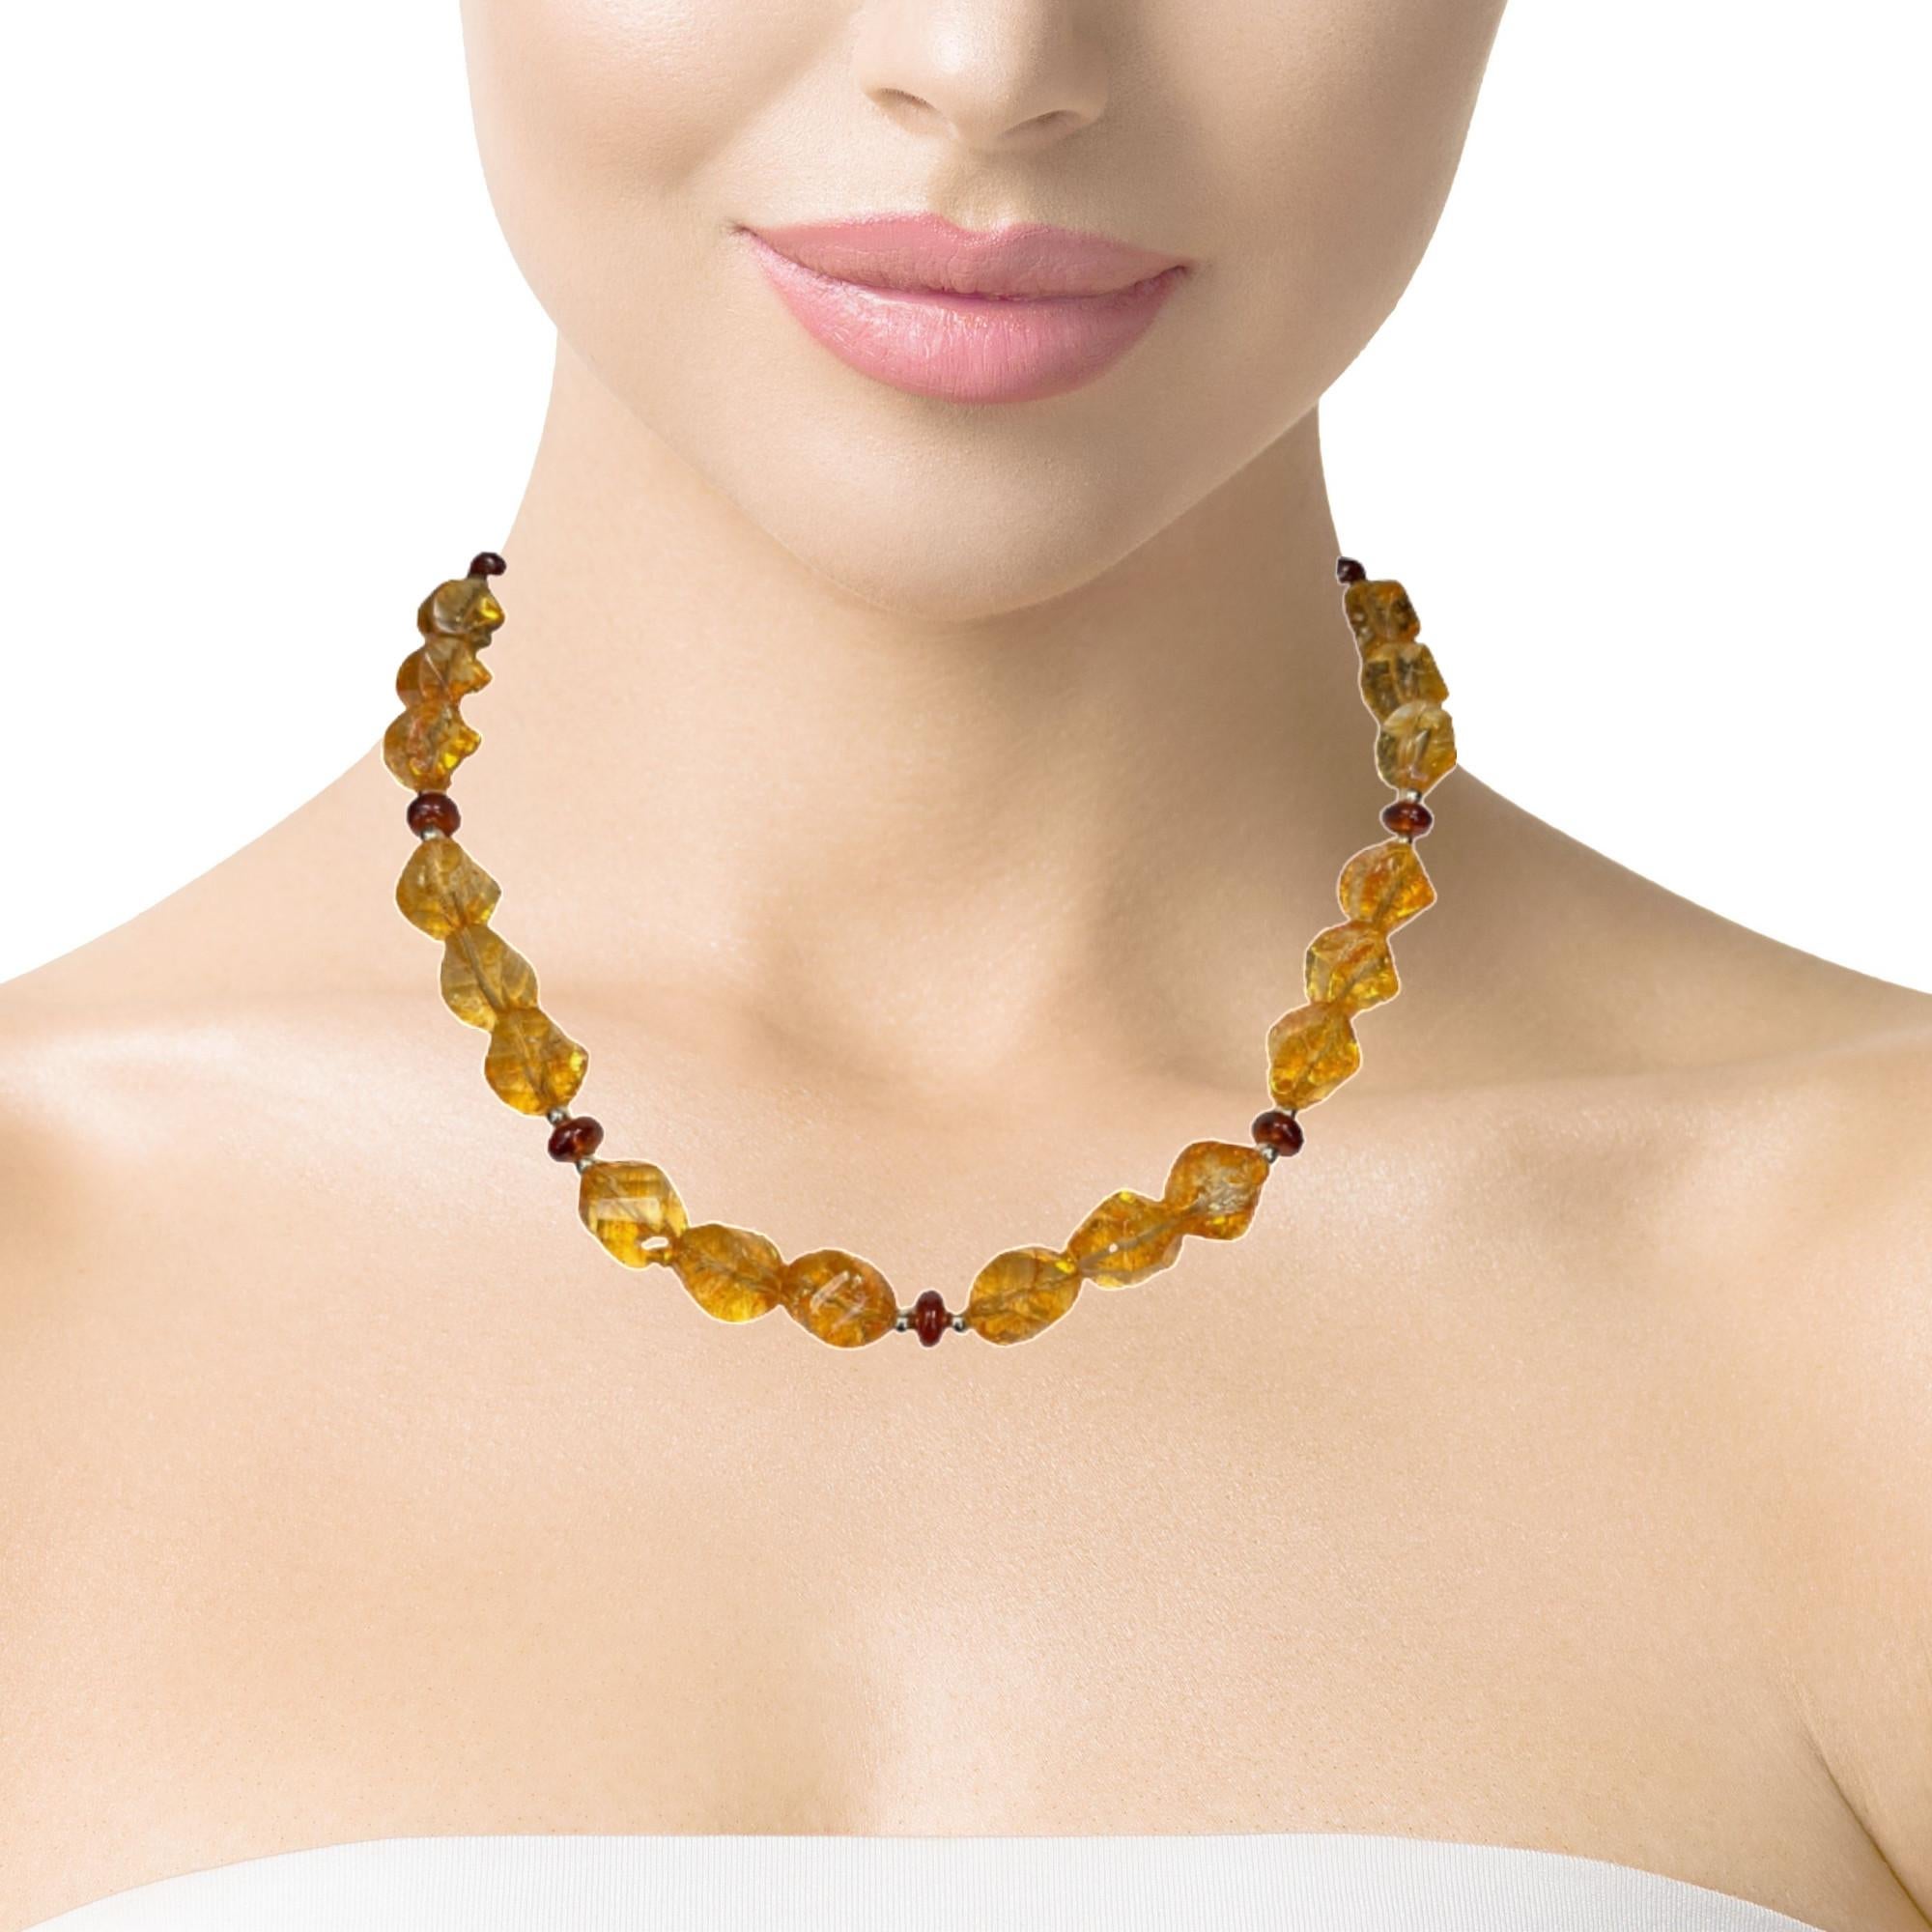 Faceted Citrine Nugget Beaded Necklace with Garnets and Yellow Gold For Sale 4